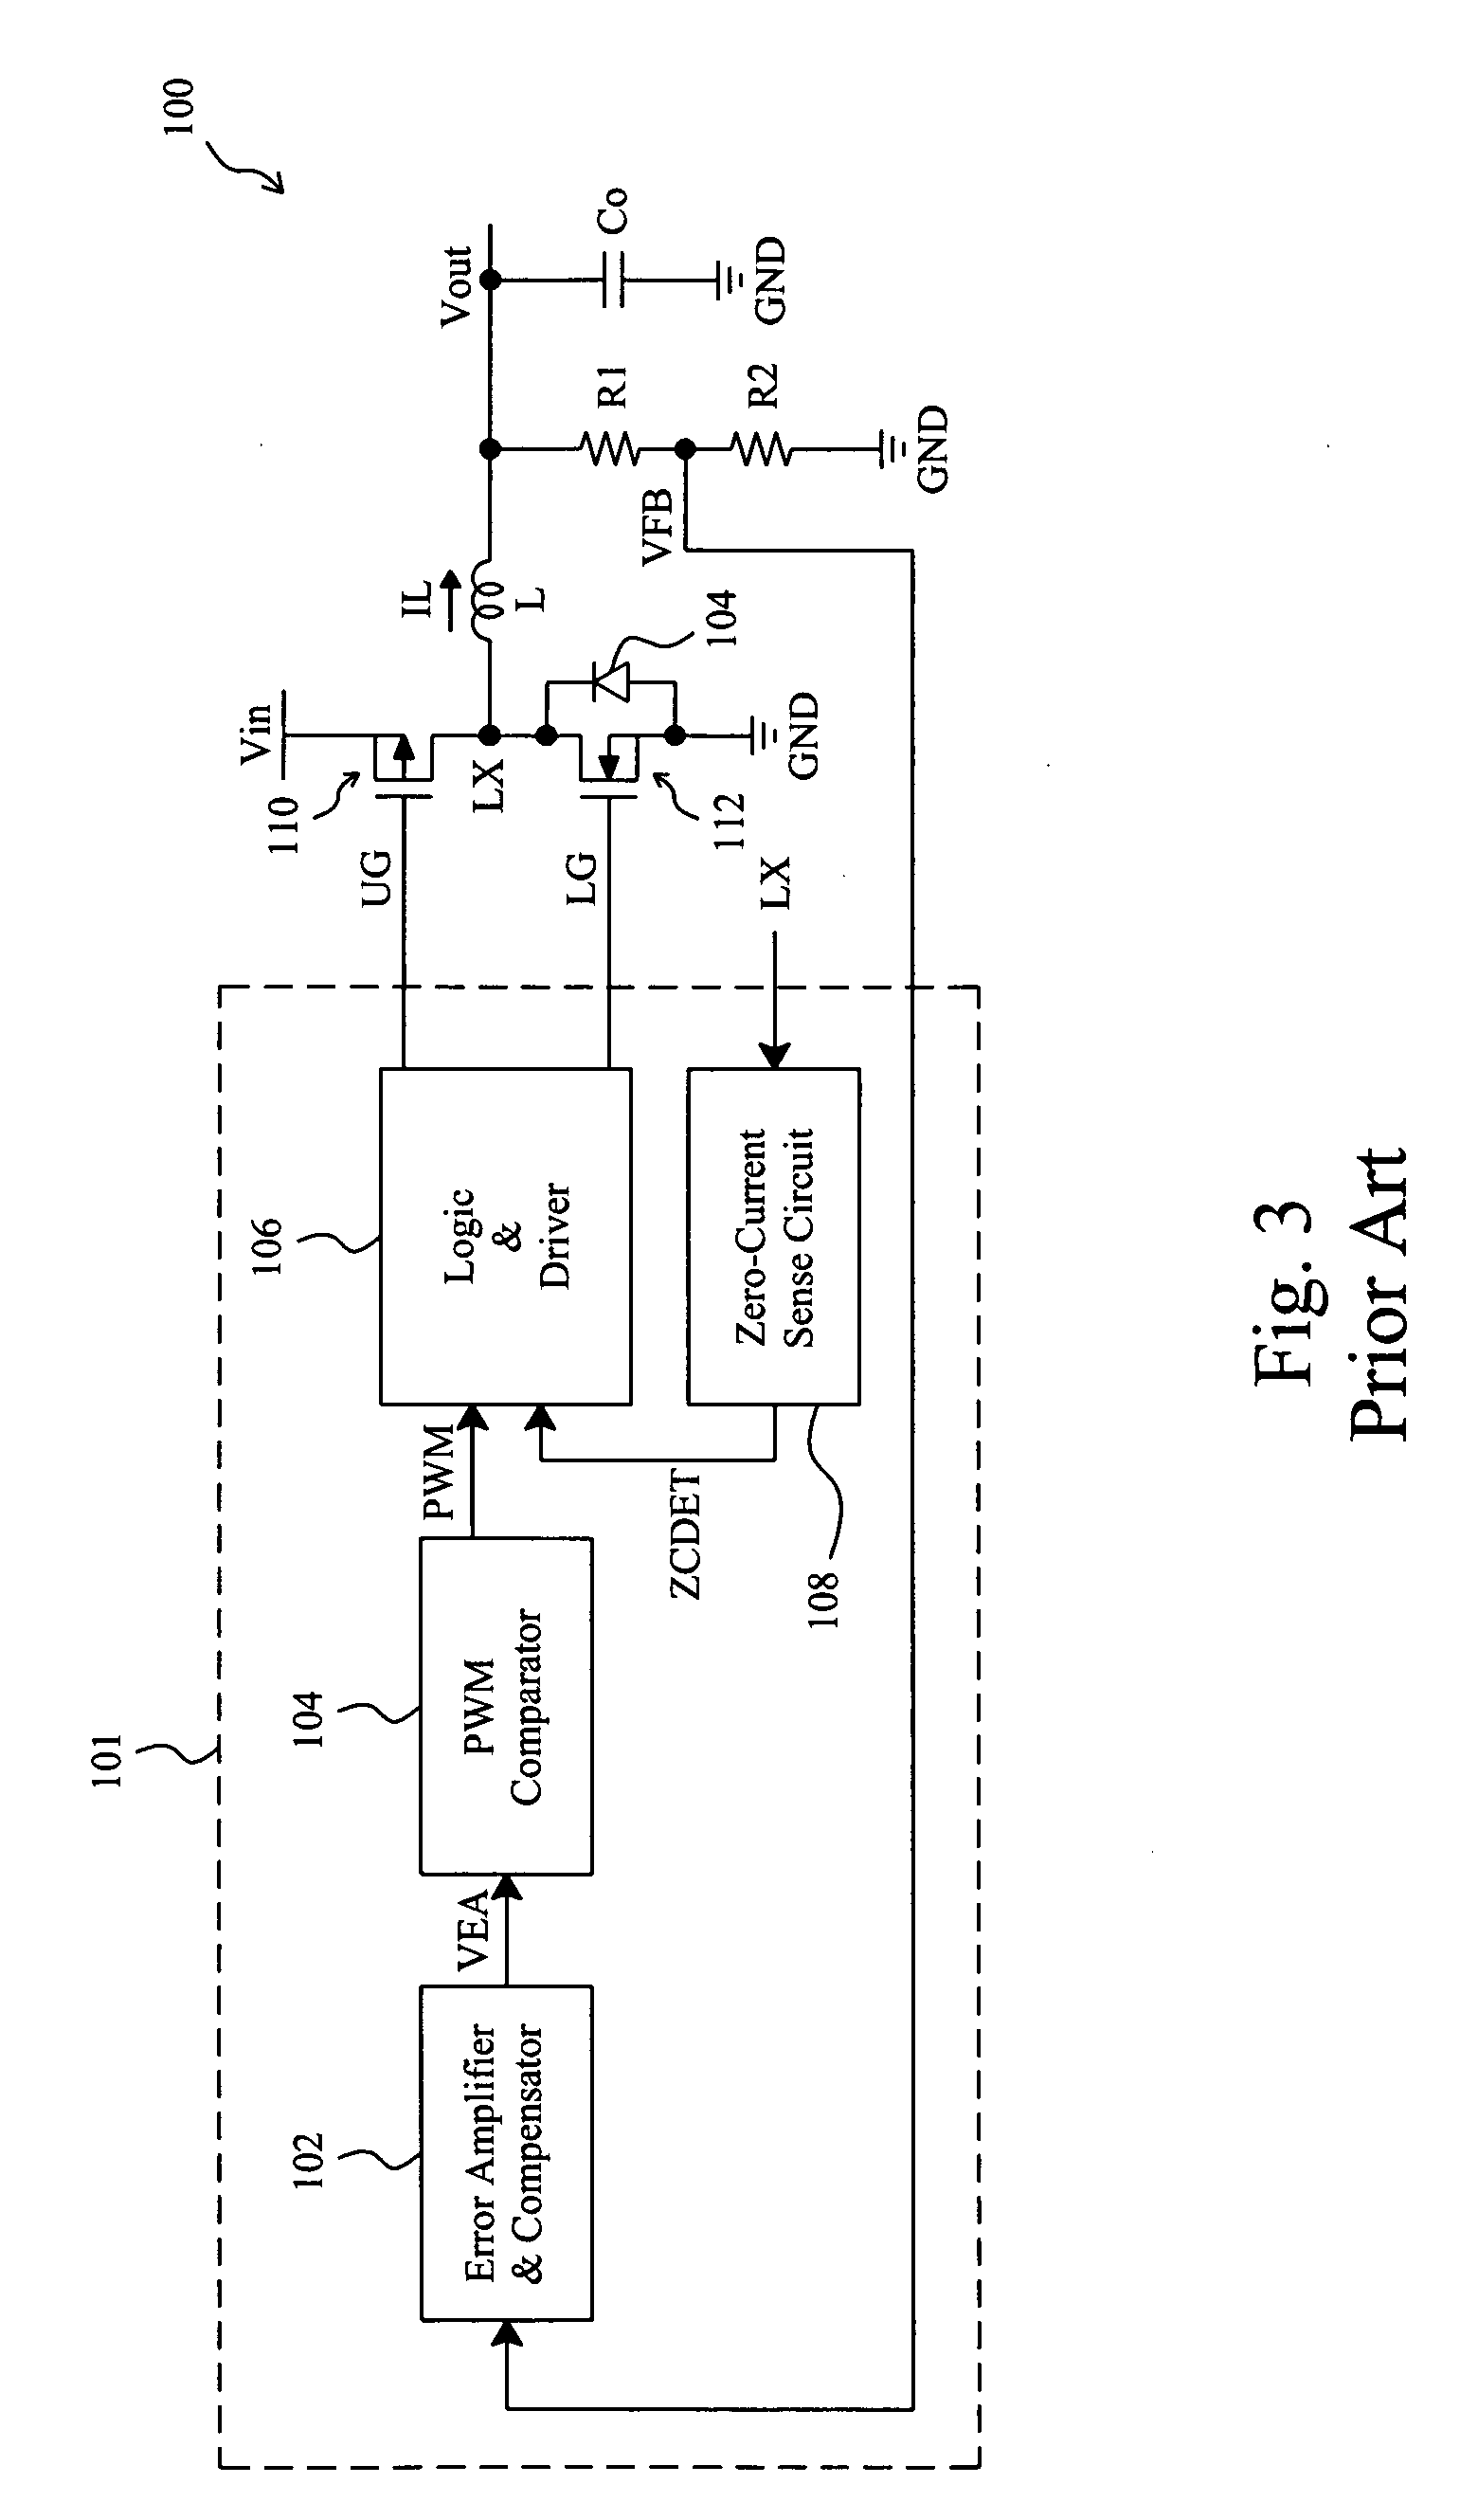 Adaptive zero current sense apparatus and method for a switching regulator